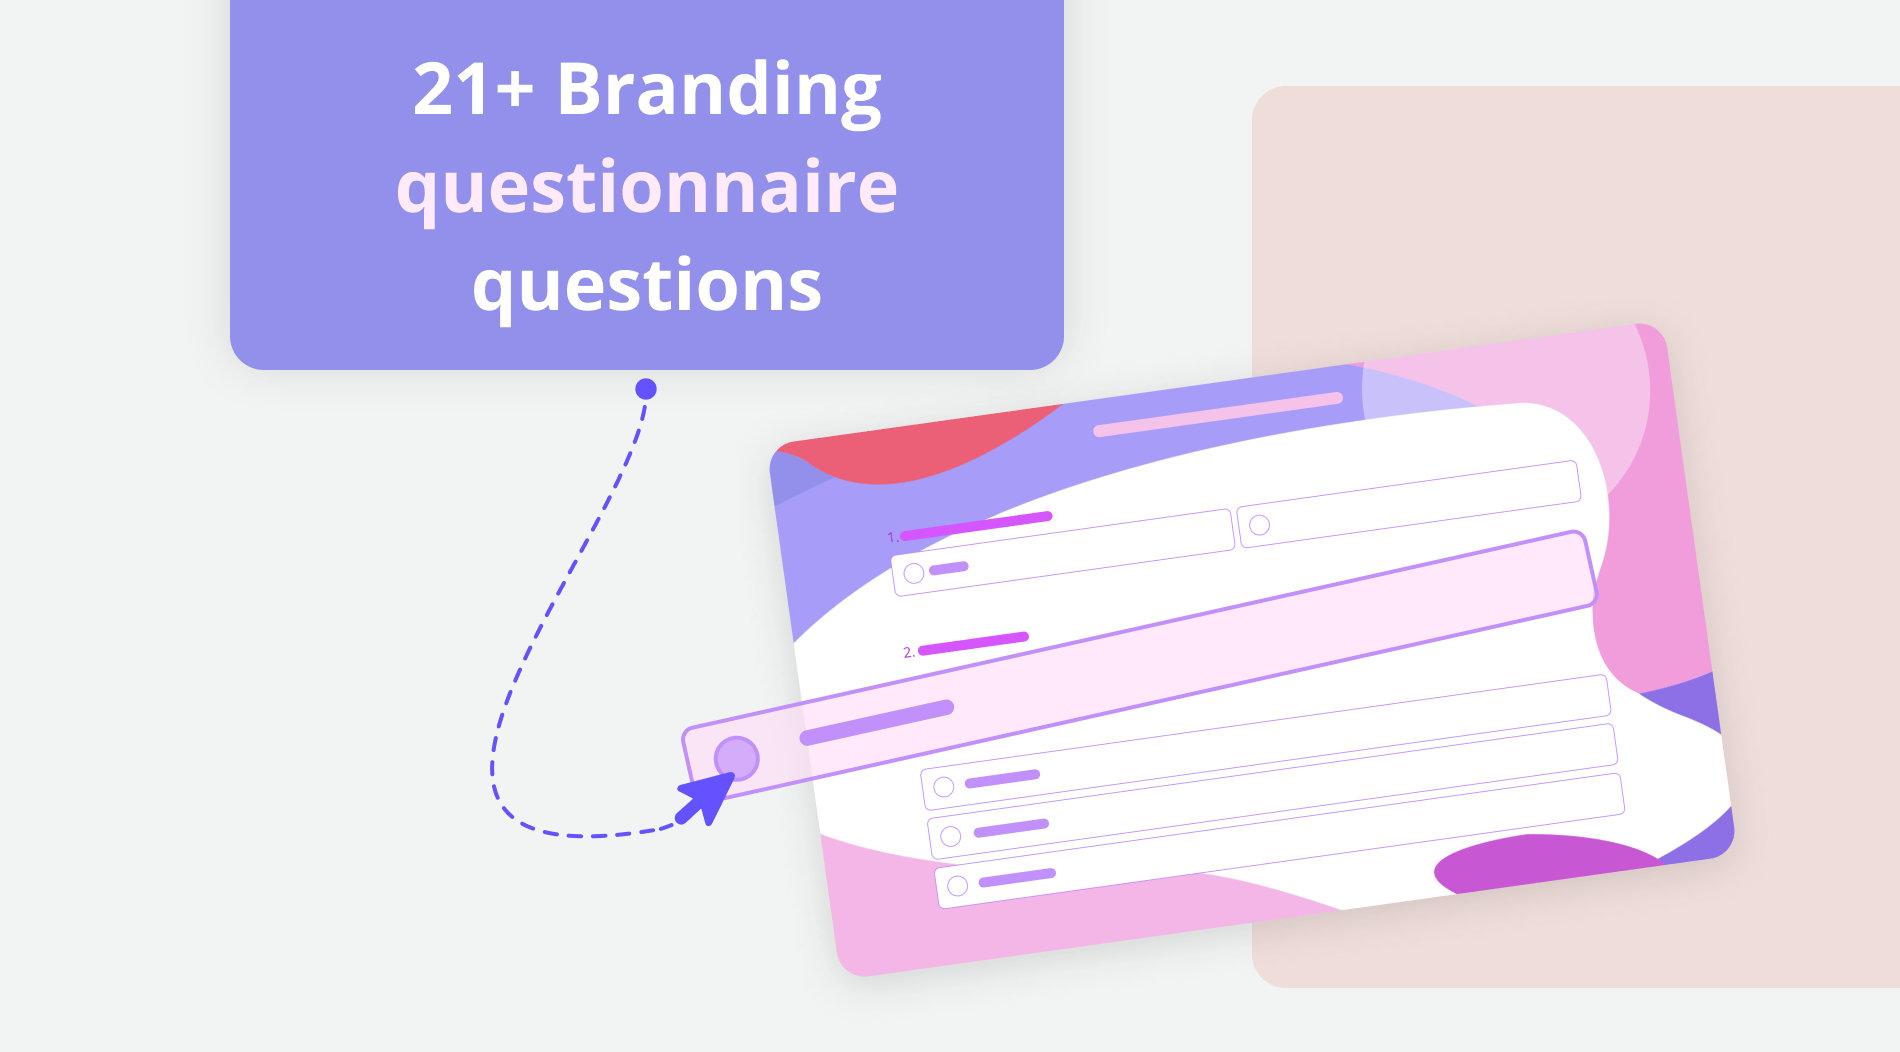 21+ Branding questionnaire questions to understand your clients